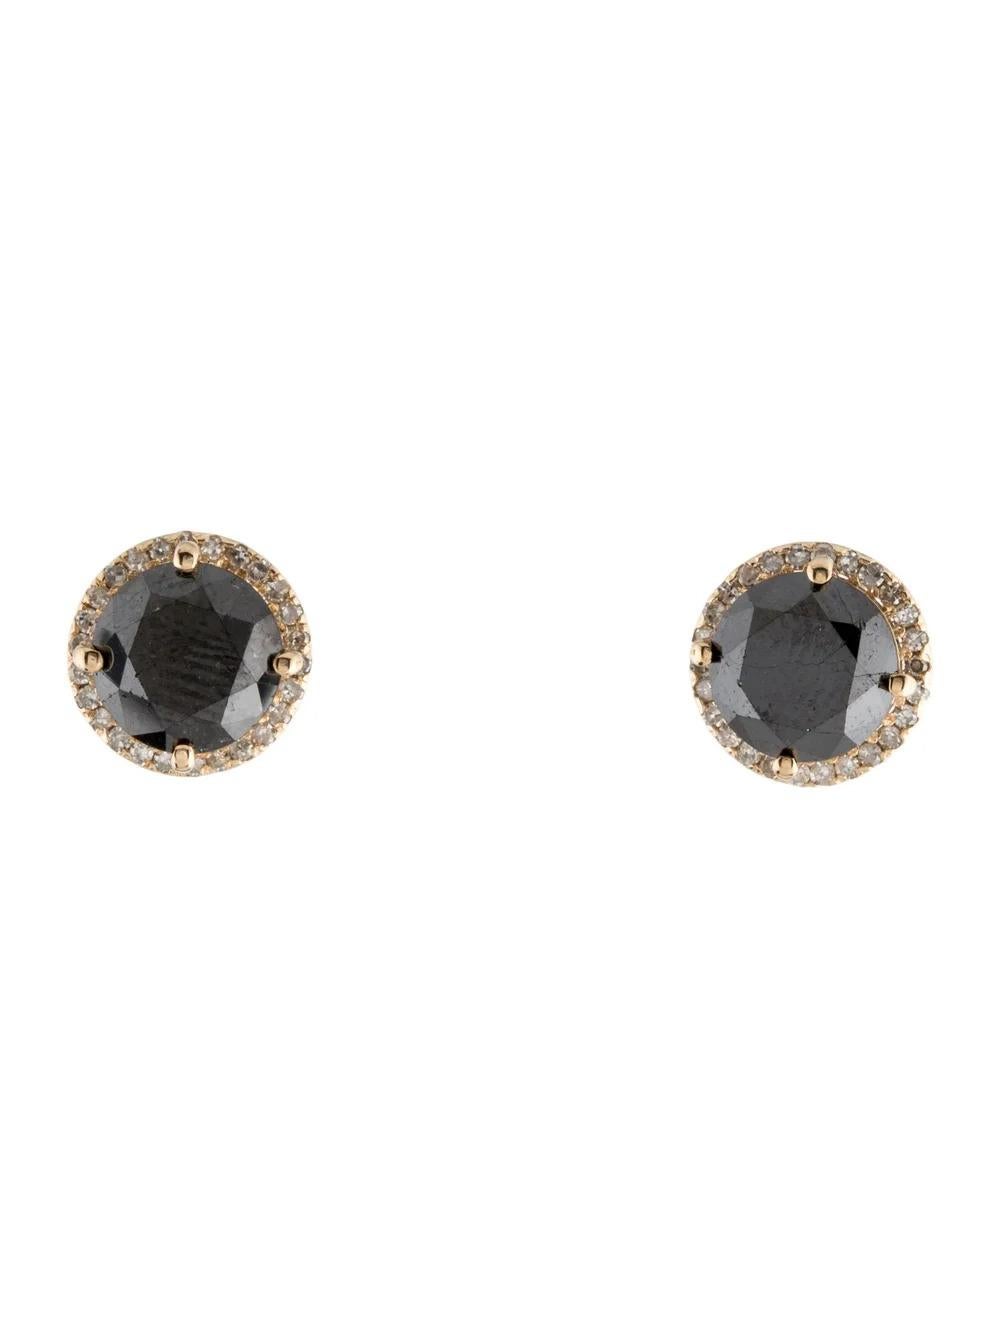 Indulge in luxury with these stunning 14K Yellow Gold Diamond Stud Earrings. Crafted with precision and elegance, these earrings are a timeless addition to any jewelry collection.

Specifications:

* Material: 14K Yellow Gold
* Length: 0.5 inches
*